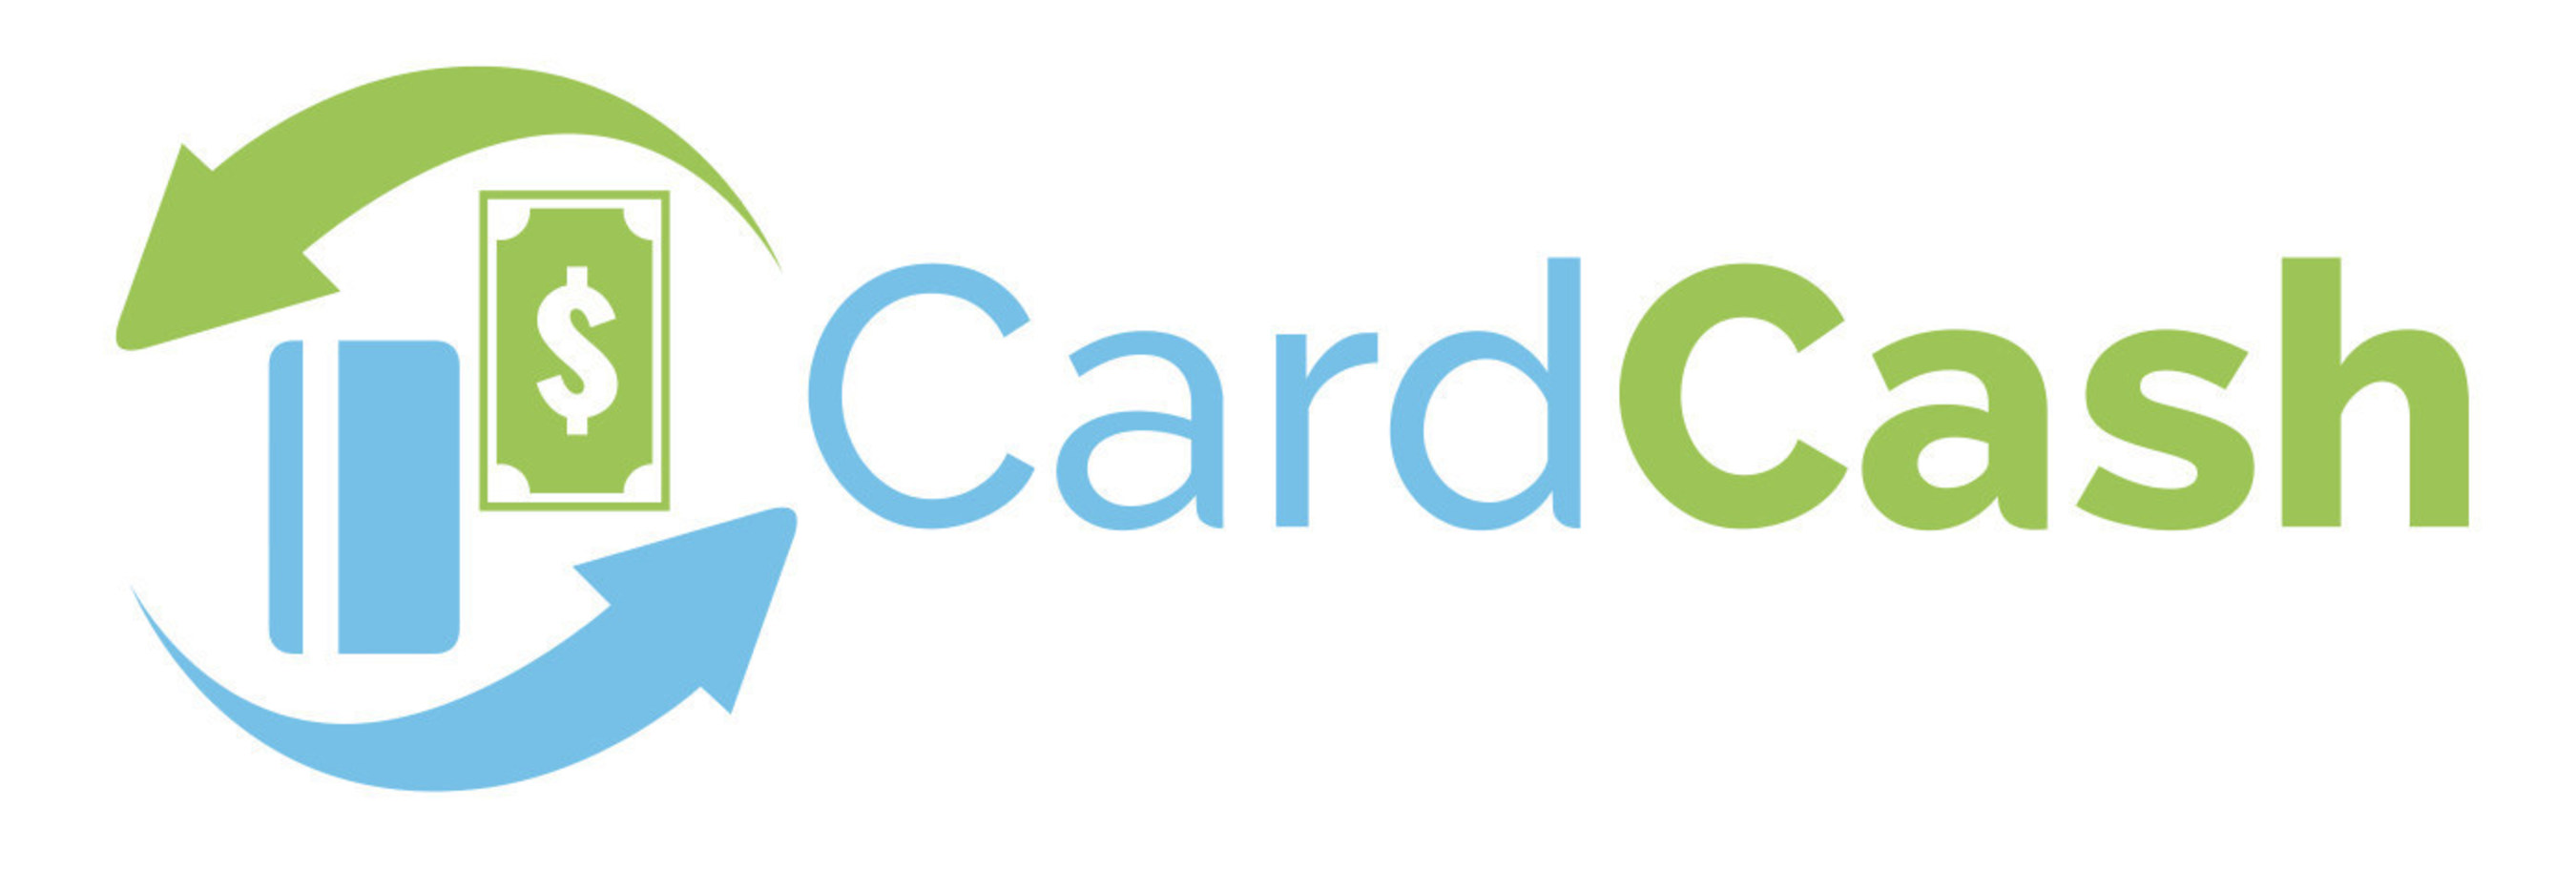 The financing brings the value of CardCash's total fundraising to $15 million to date.